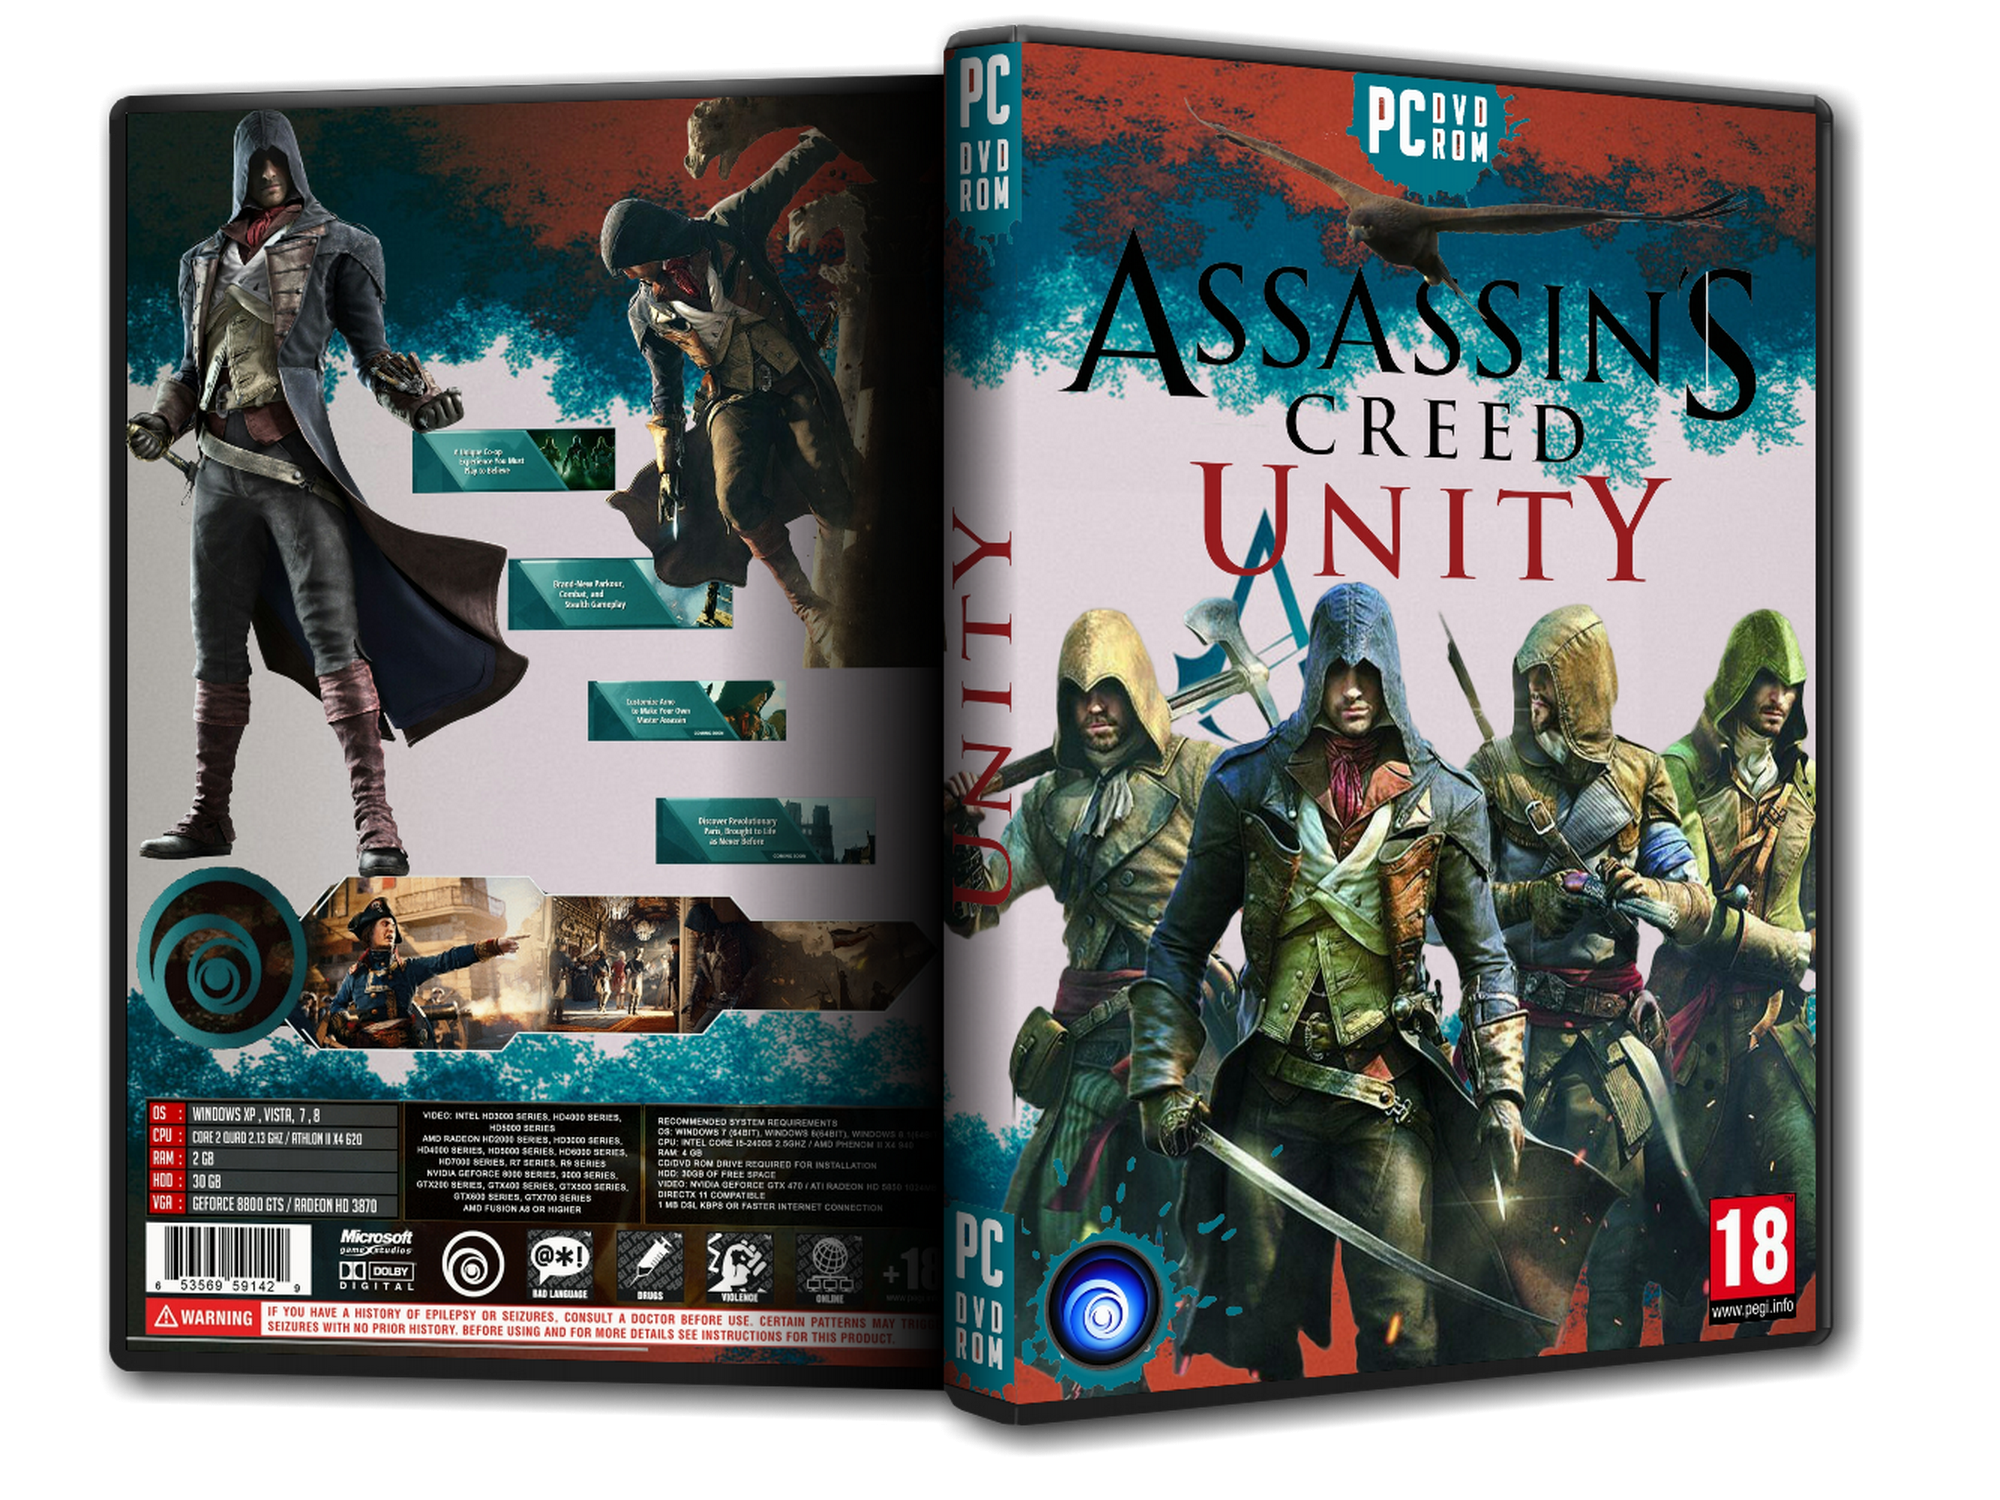 Assassin's creed xbox one. Assassin's Creed единство Xbox one. Assassin's Creed Unity Xbox one. Ассасин Крид Юнити на Xbox 360. Юнити ассасин Крид обложка Xbox one.